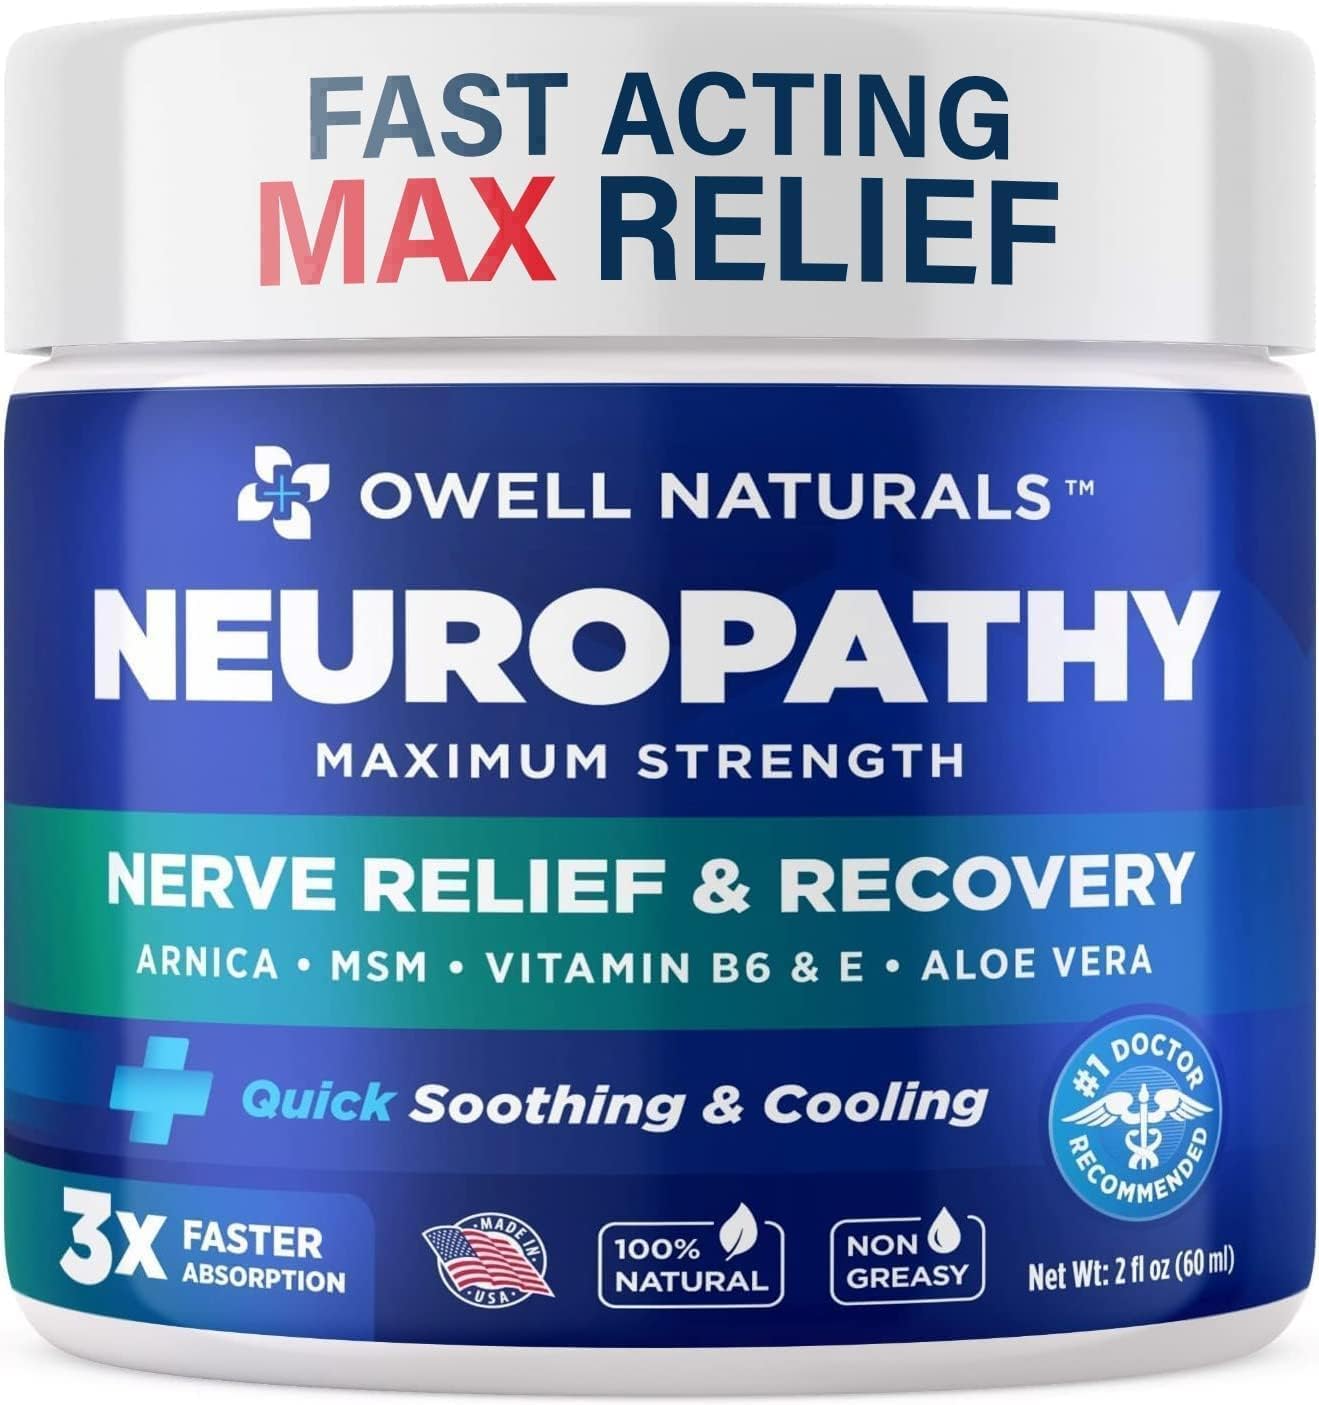 OWELL NATURALS Neuropathy Nerve Relief Cream - Maximum Strength Relief Cream for Foot, Hands, Legs, Toes Includes Arnica, Vitamin B6, Aloe Vera, MSM - Made in USA